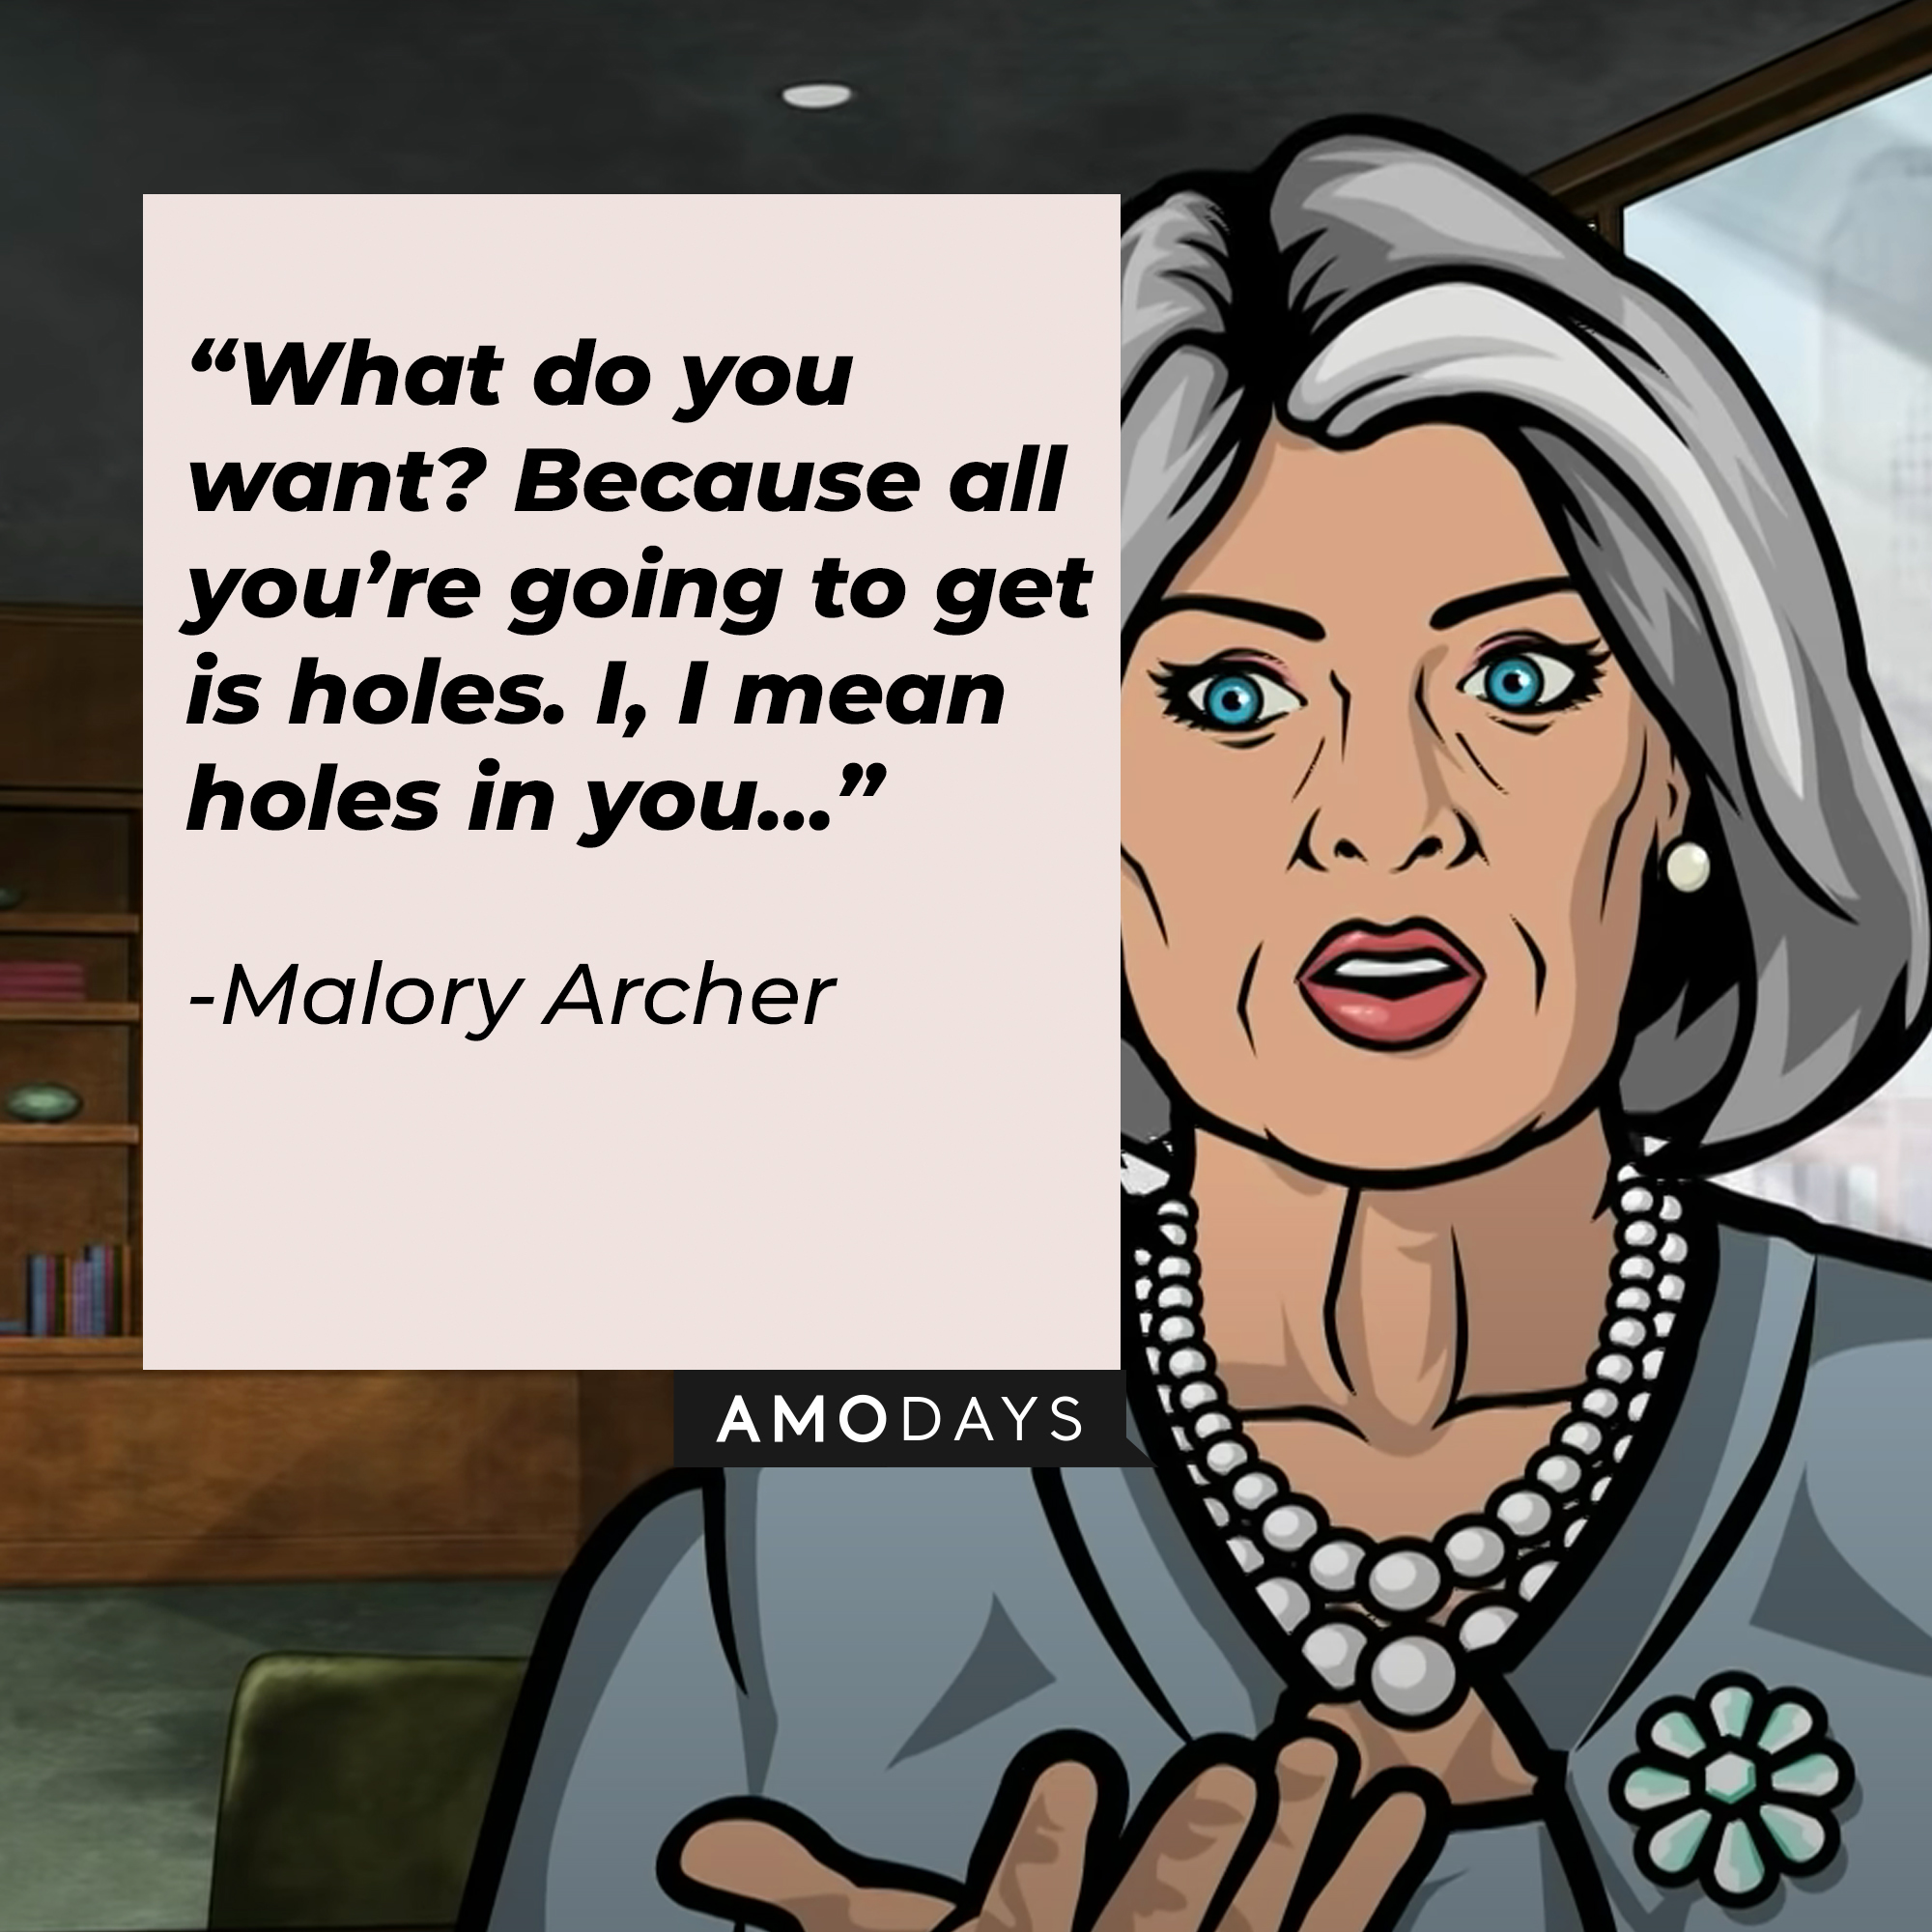 An Image of Malory Archer with her quote: “Who’s there? What do you want? Because all you’re going to get is holes. I, I mean holes in you…” | Source: Youtube.com/Netflixnordic